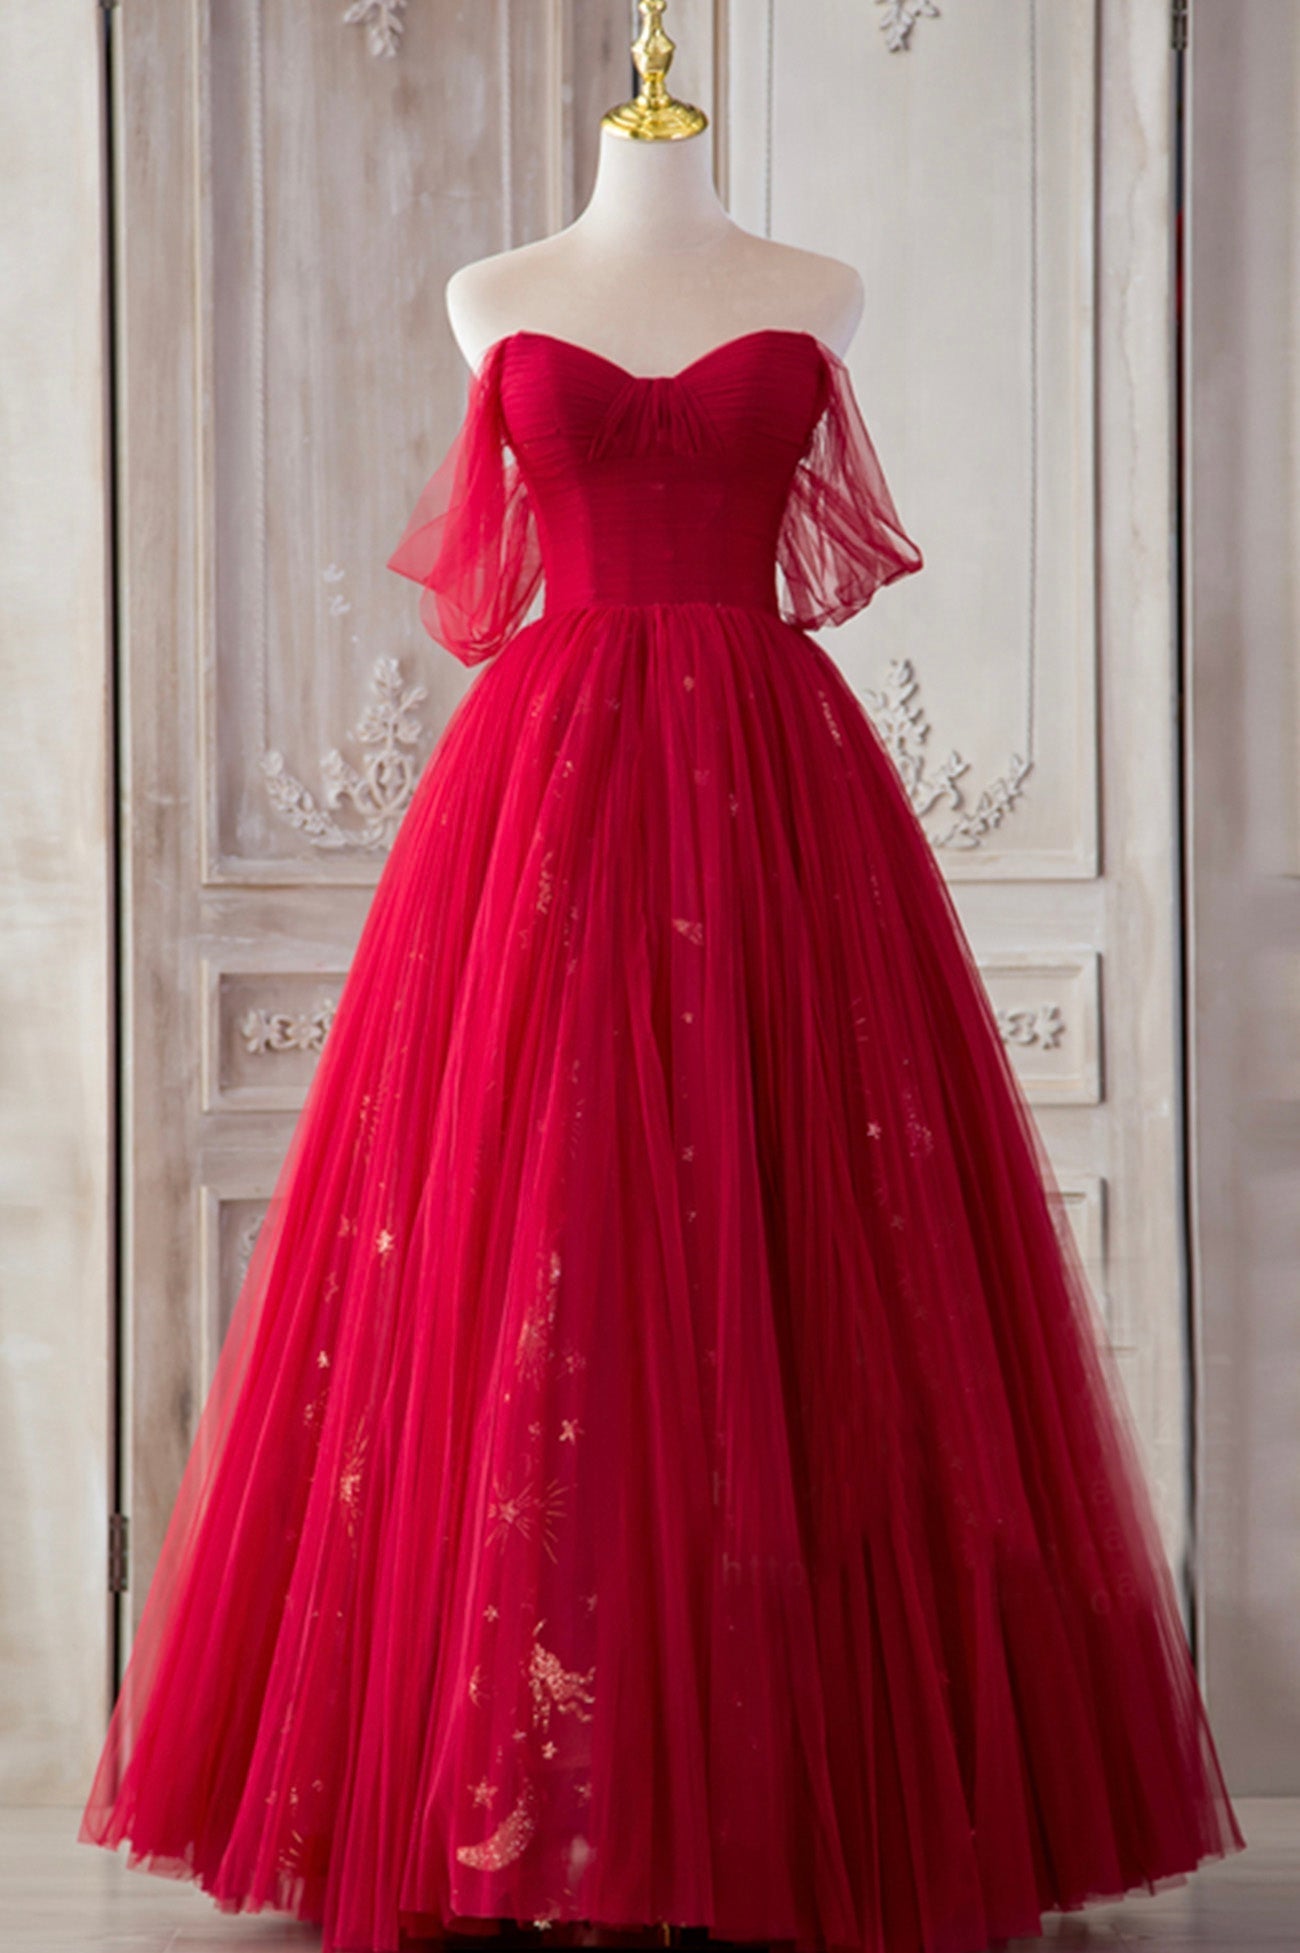 Prom Dresse Backless, The Red Strapless Tulle Long A-Line Prom Dress is a showstopper. With its off-the-shoulder design and A-line silhouette, it perfectly blends elegance and allure.